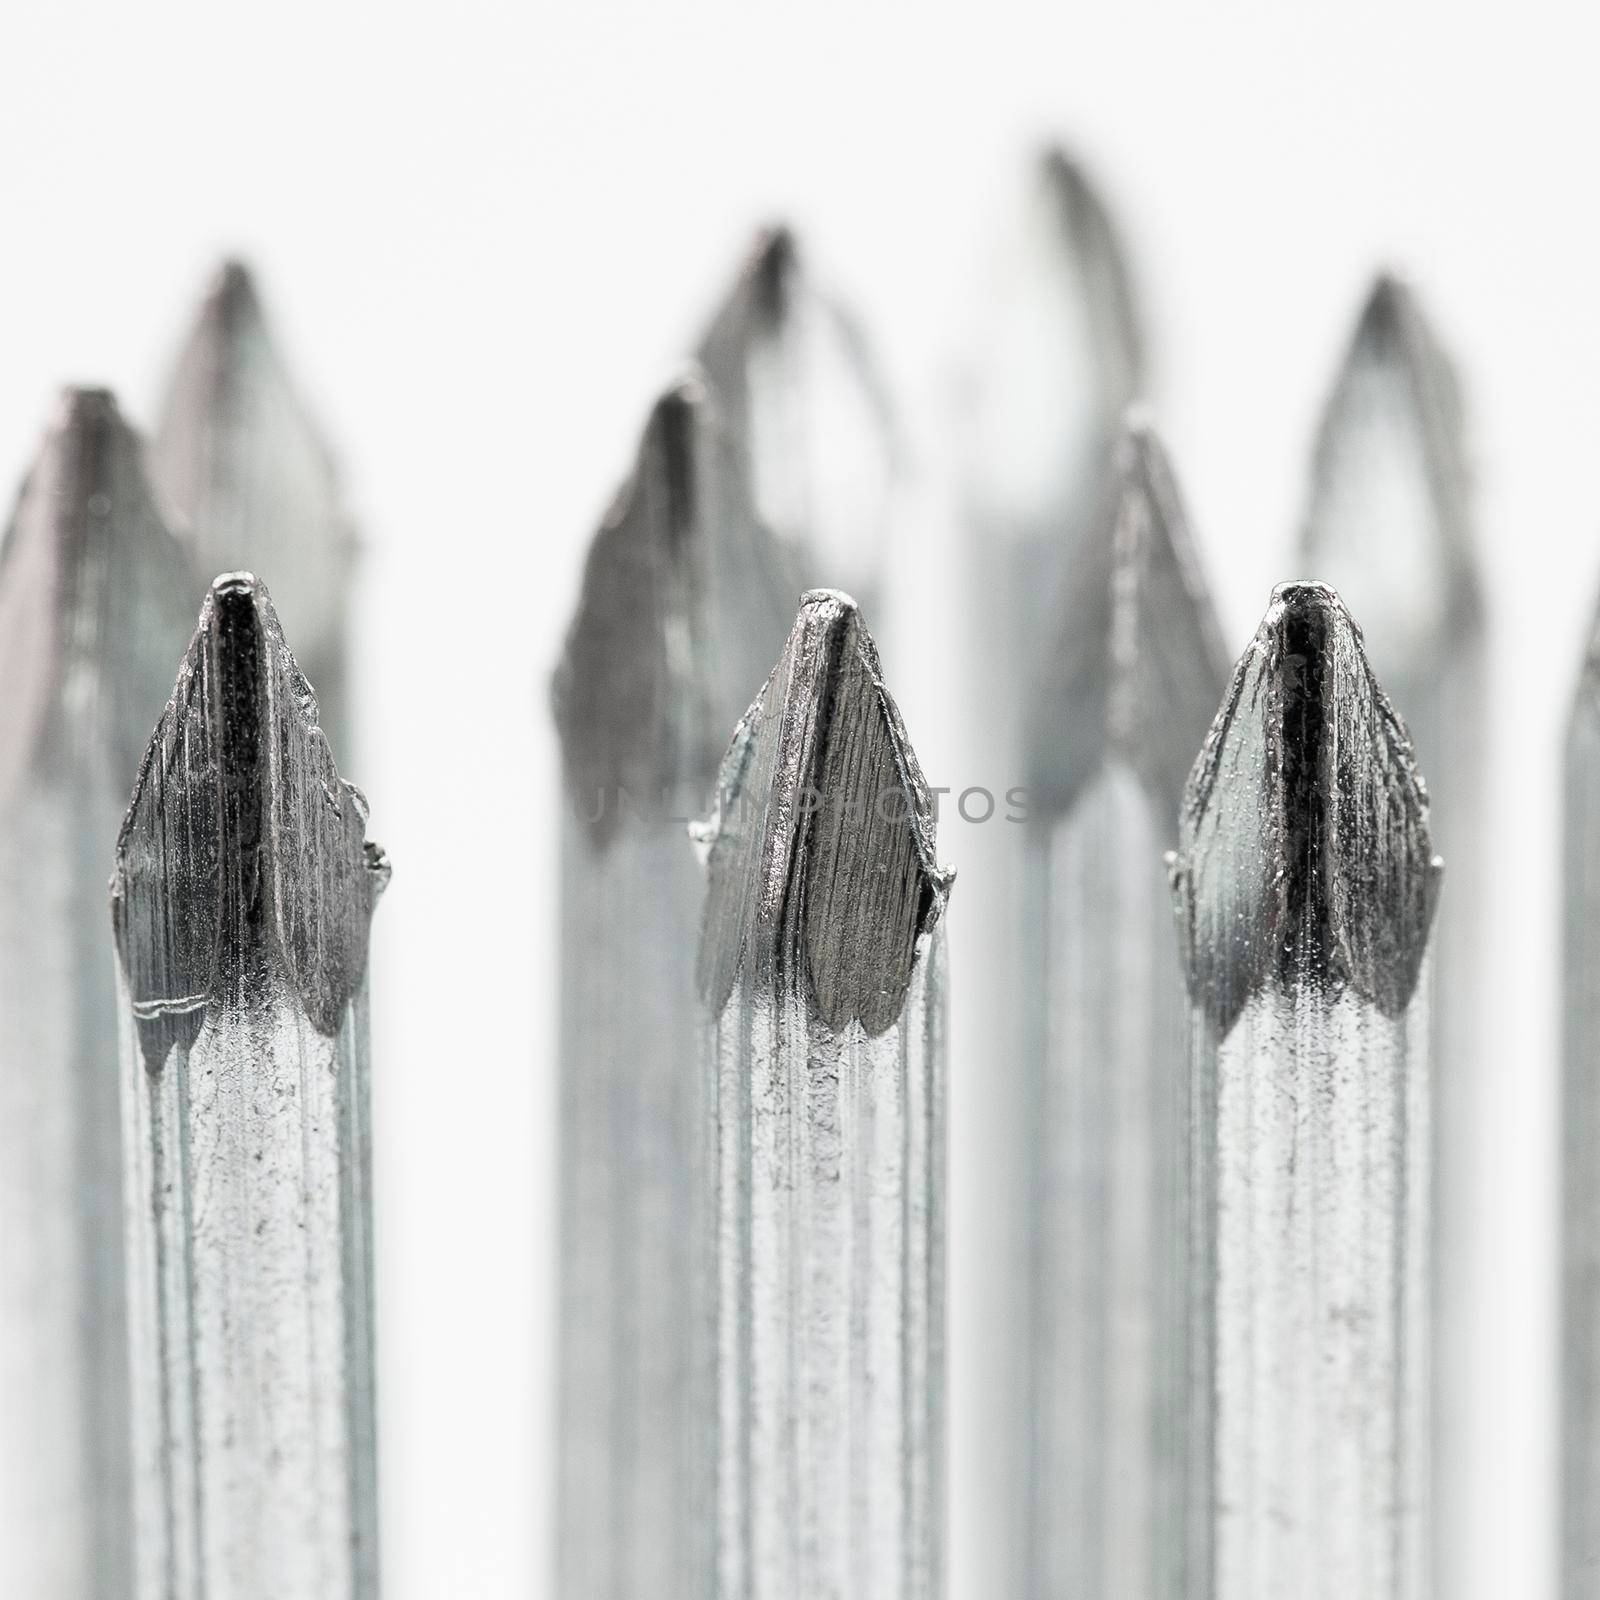 New concrete nails on a white background by titipong